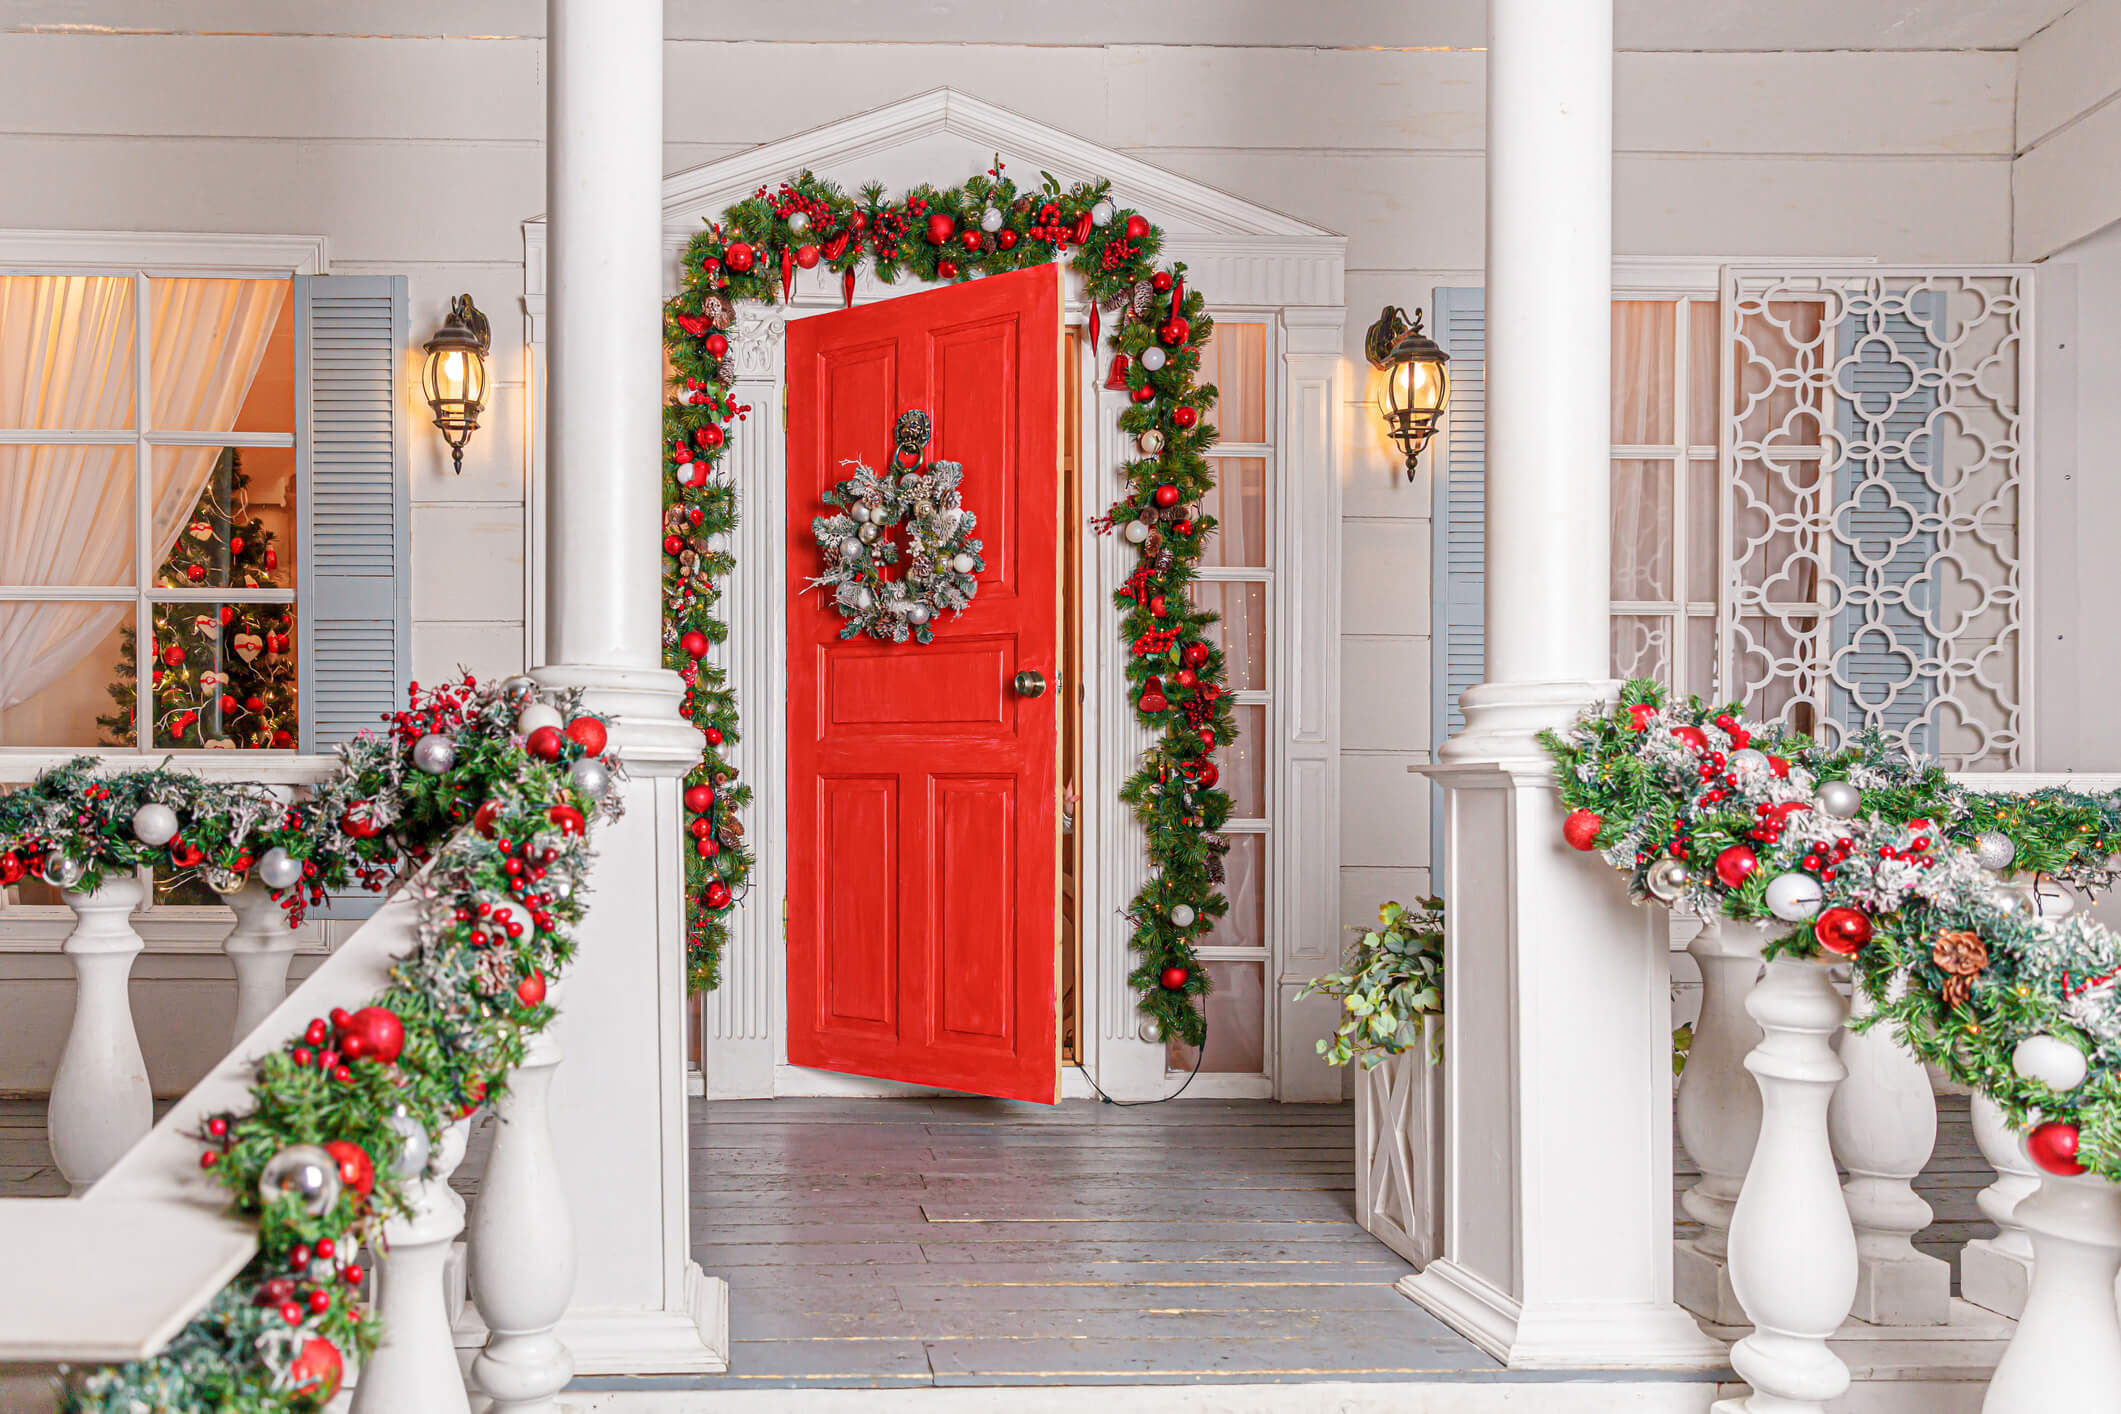 Securing Your Garage Door Before the Holidays